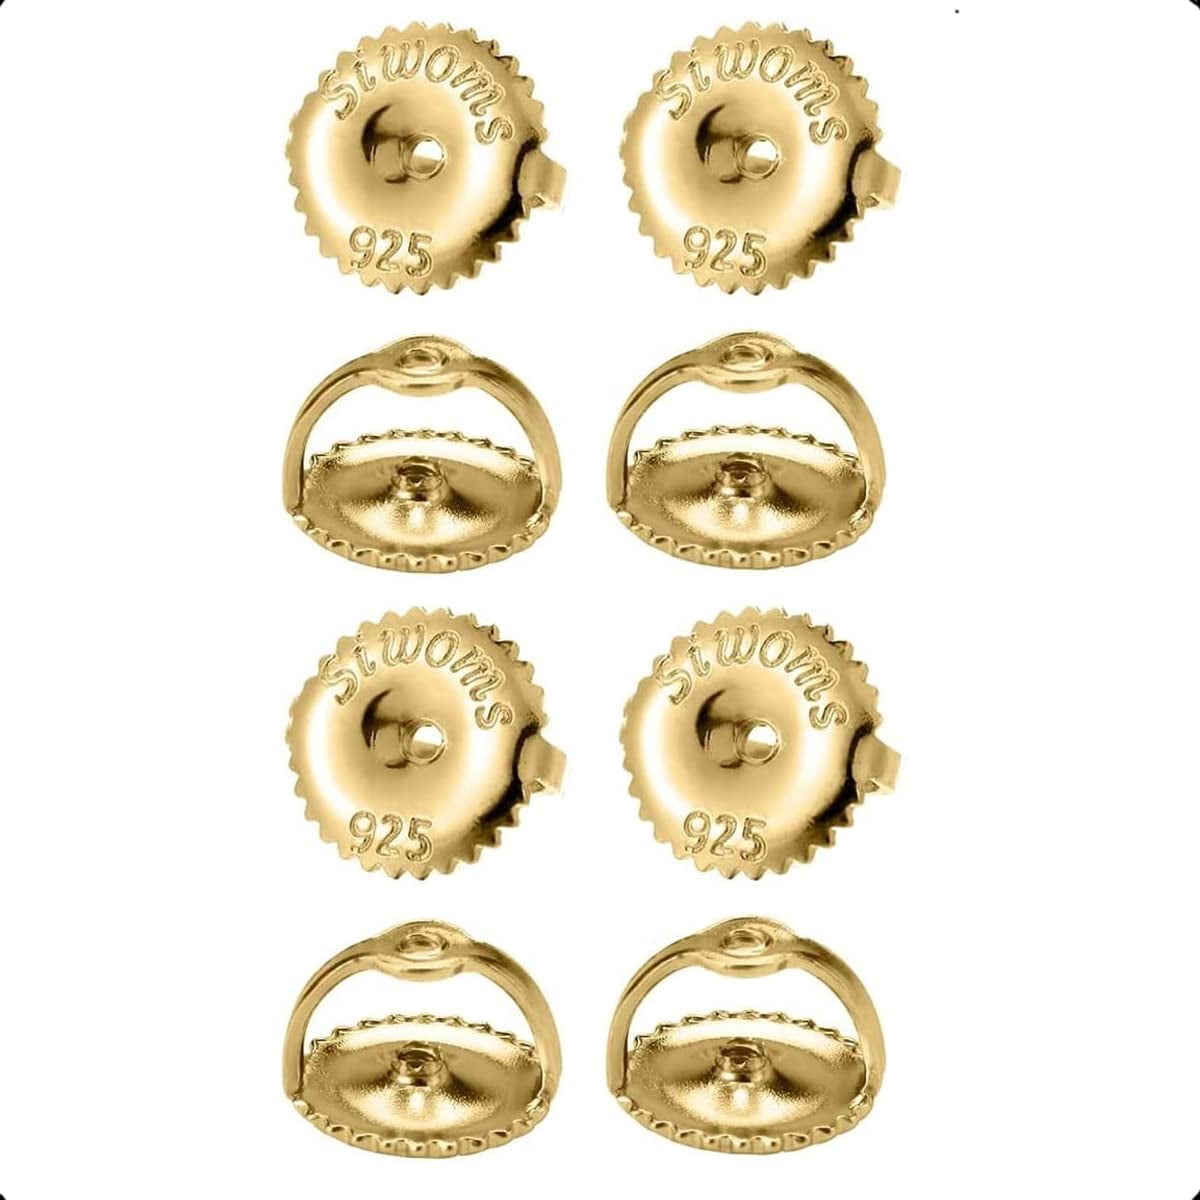 Siwoms 2-Pairs 18K Gold Plated Locking Earring-Back Replacements